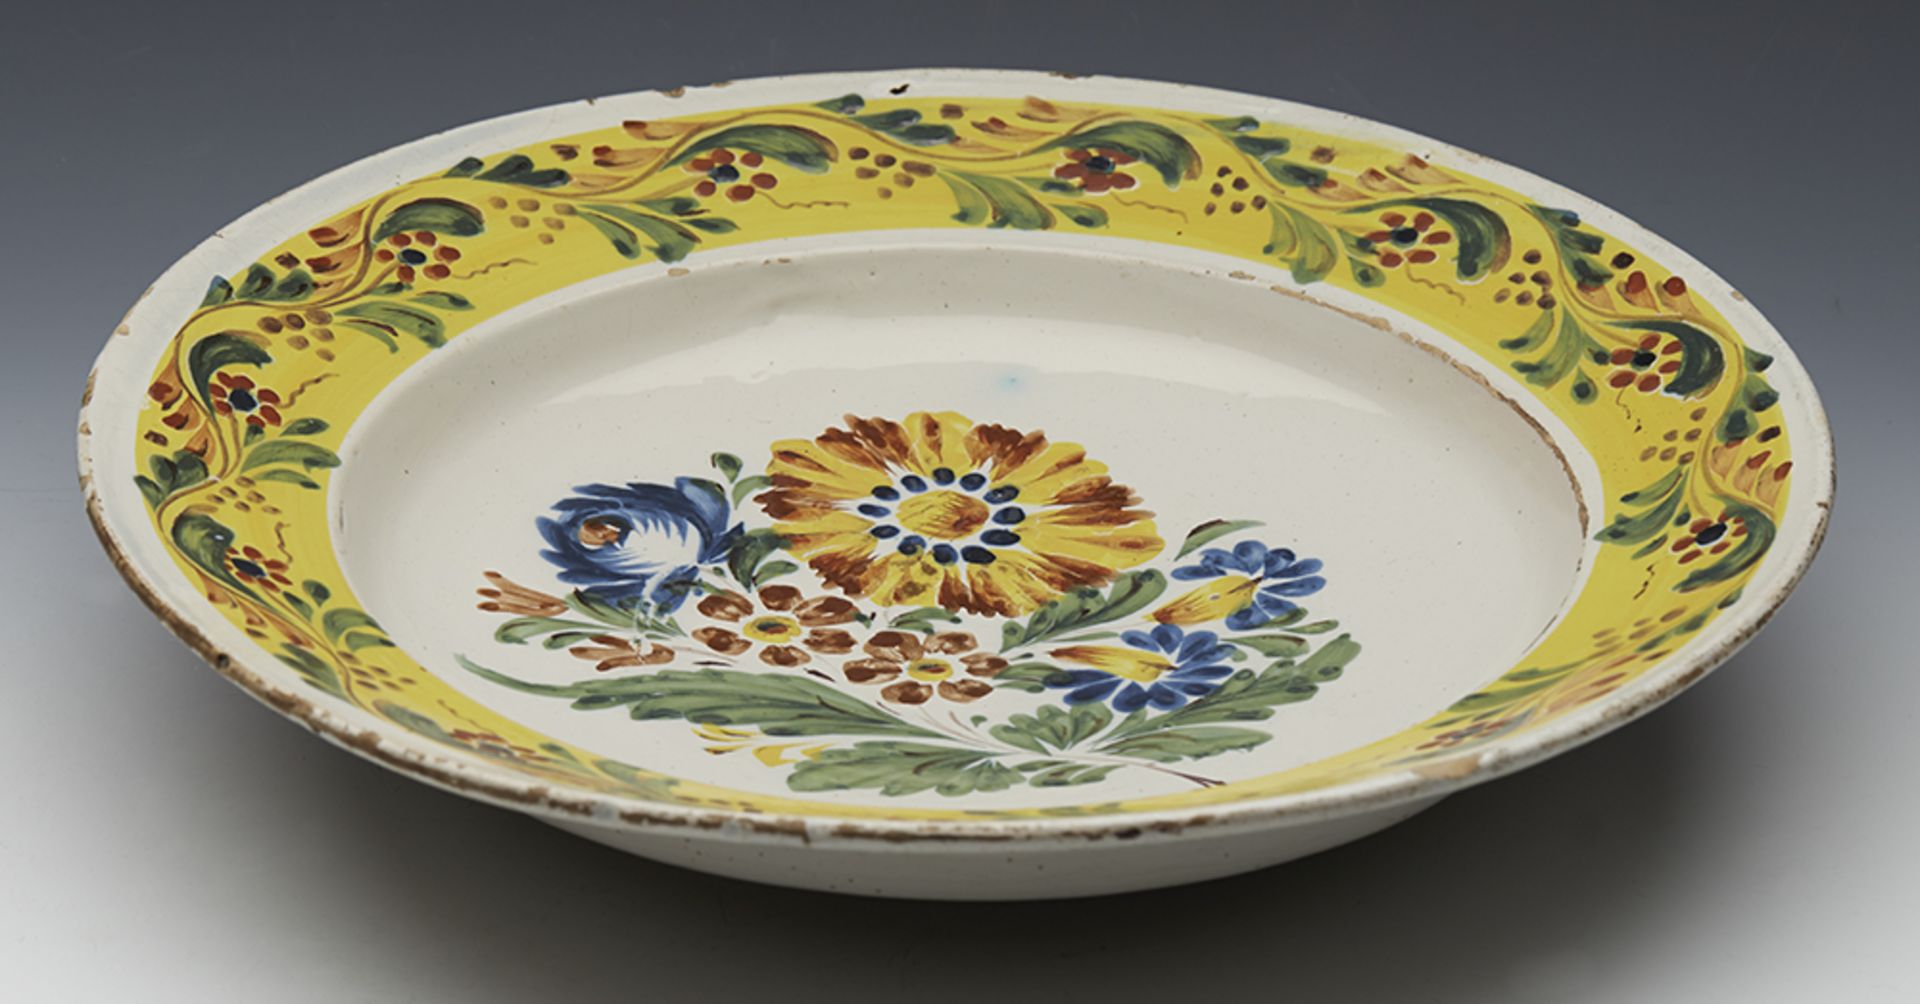 Antique Polychrome Floral Painted Faience Dish 18Th C. - Image 9 of 9